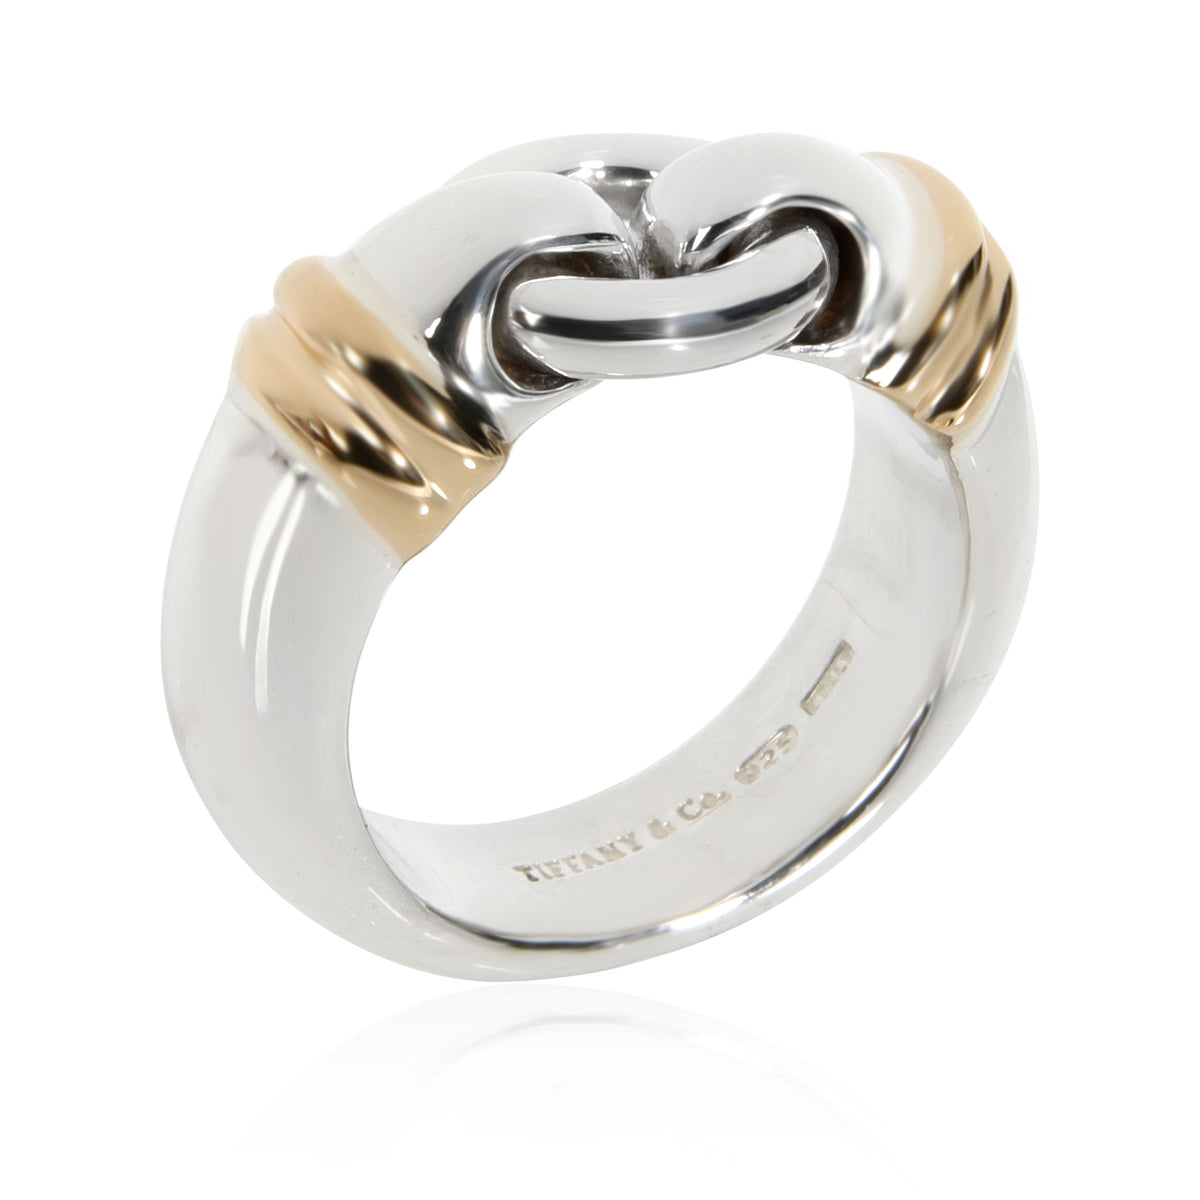 Tiffany & Co. Interlocking Circle Ring in Sterling Silver with Gold Accents